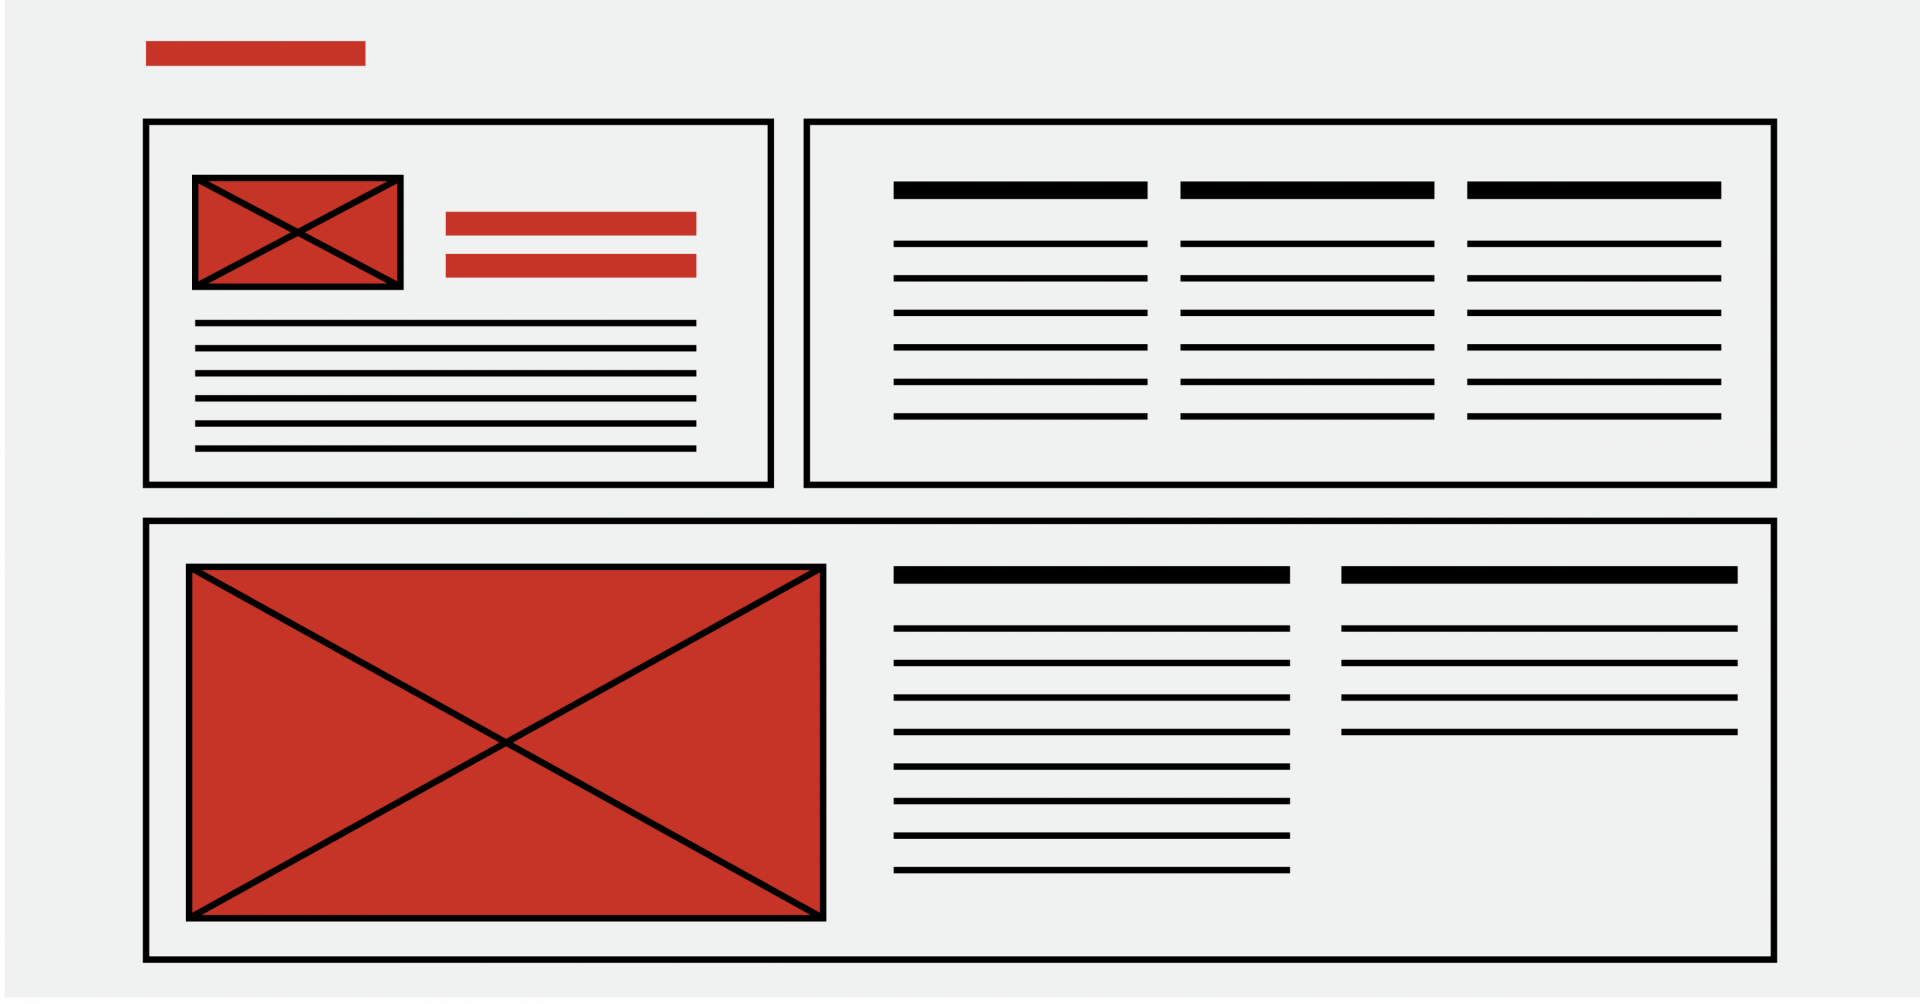 A website wireframe in red and black.